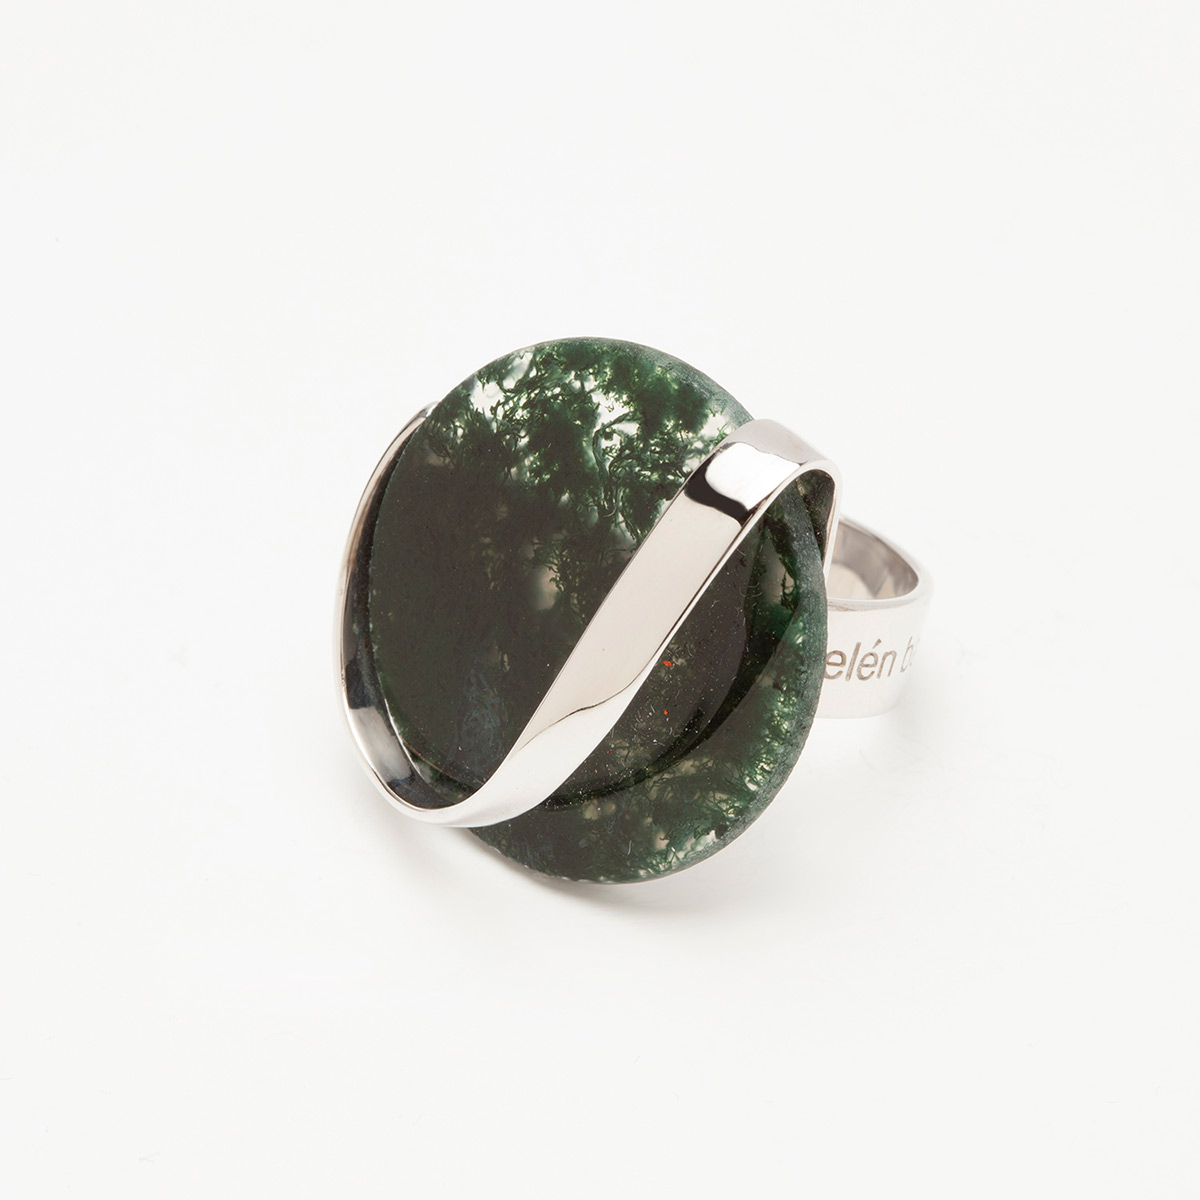 Sue handmade sterling silver and moss agate ring designed by Belen Bajo